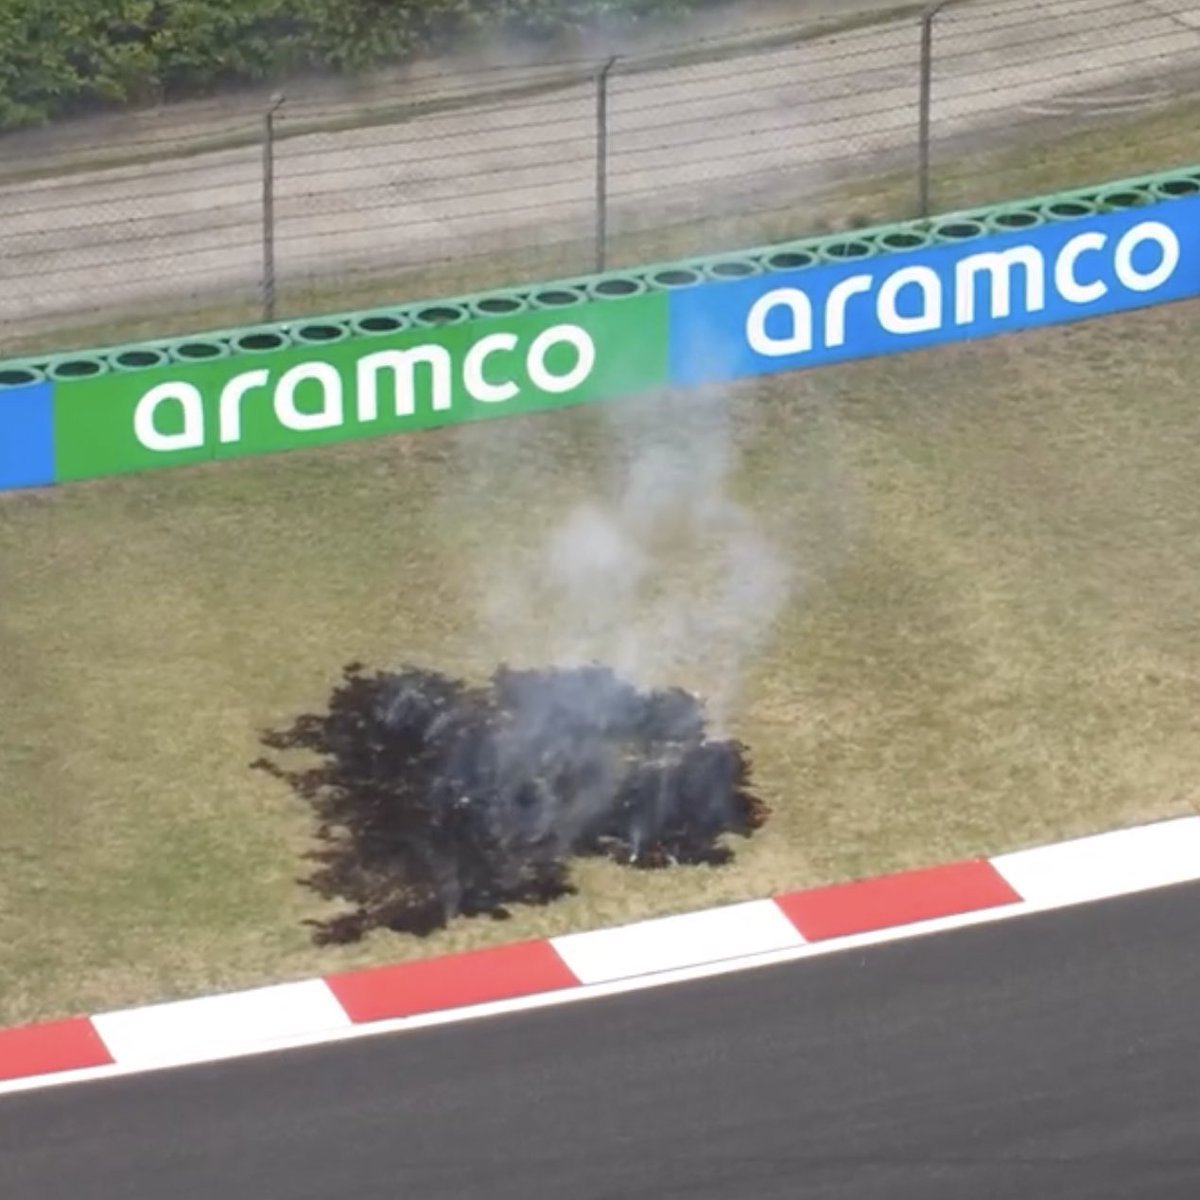 A grass fire halted racing at the Shanghai International Circuit.